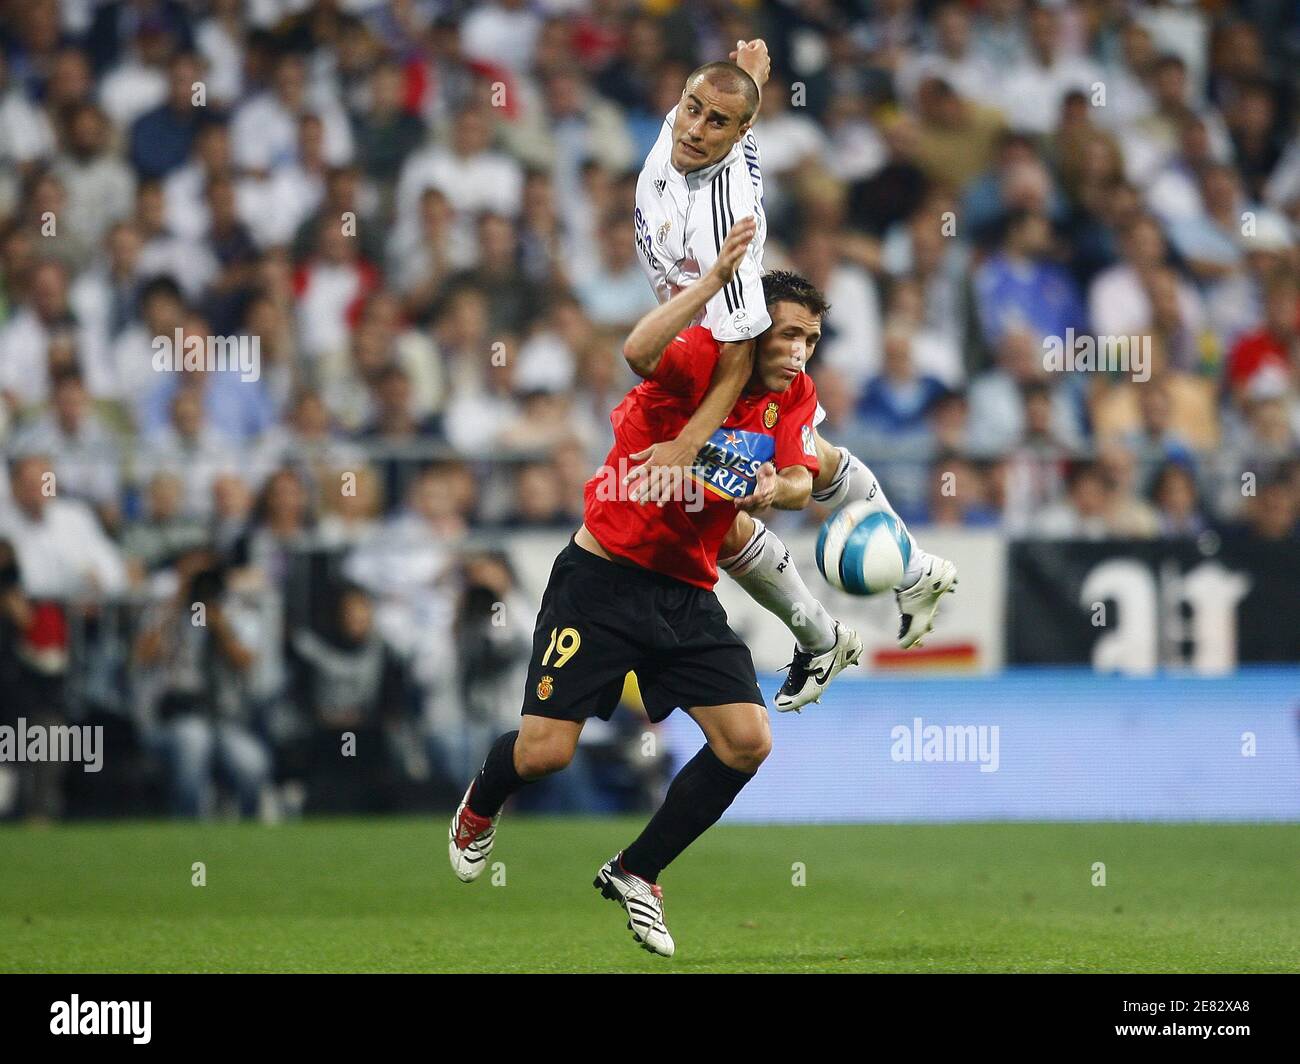 Real Madrid ' s Fabio Cannavaro in action during the Spanish League soccer, Real  Madrid vs Mallorca at the Santiago Bernabeu stadium in Madrid, Spain on  June 17, 2007. Real Madrid won